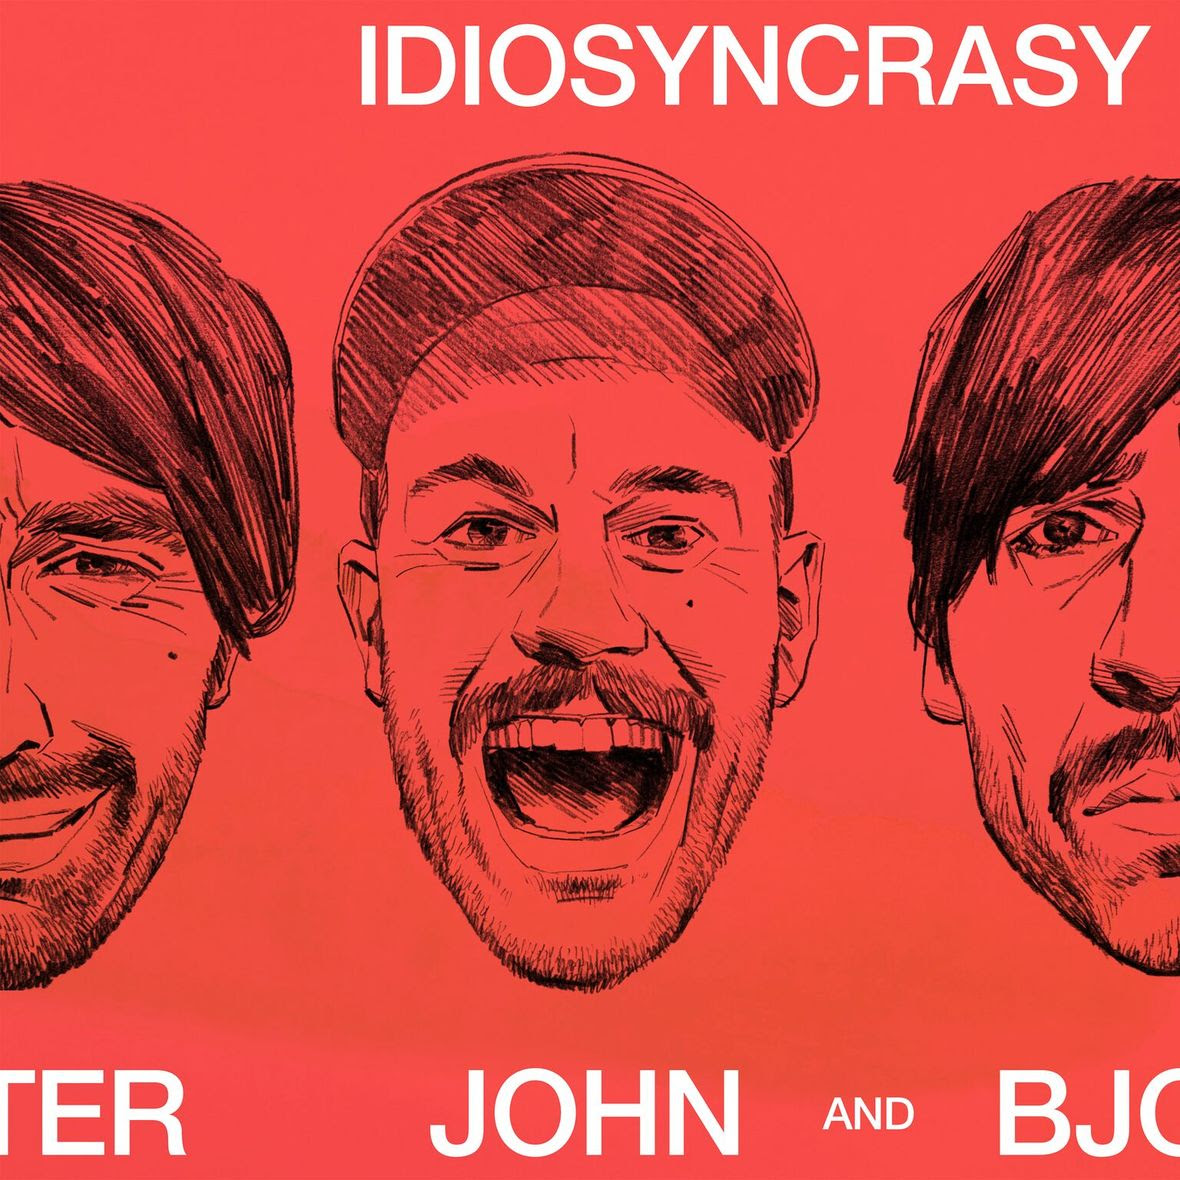 Peter Bjorn and John Release "Idiosyncrasy" Consequence of Sound